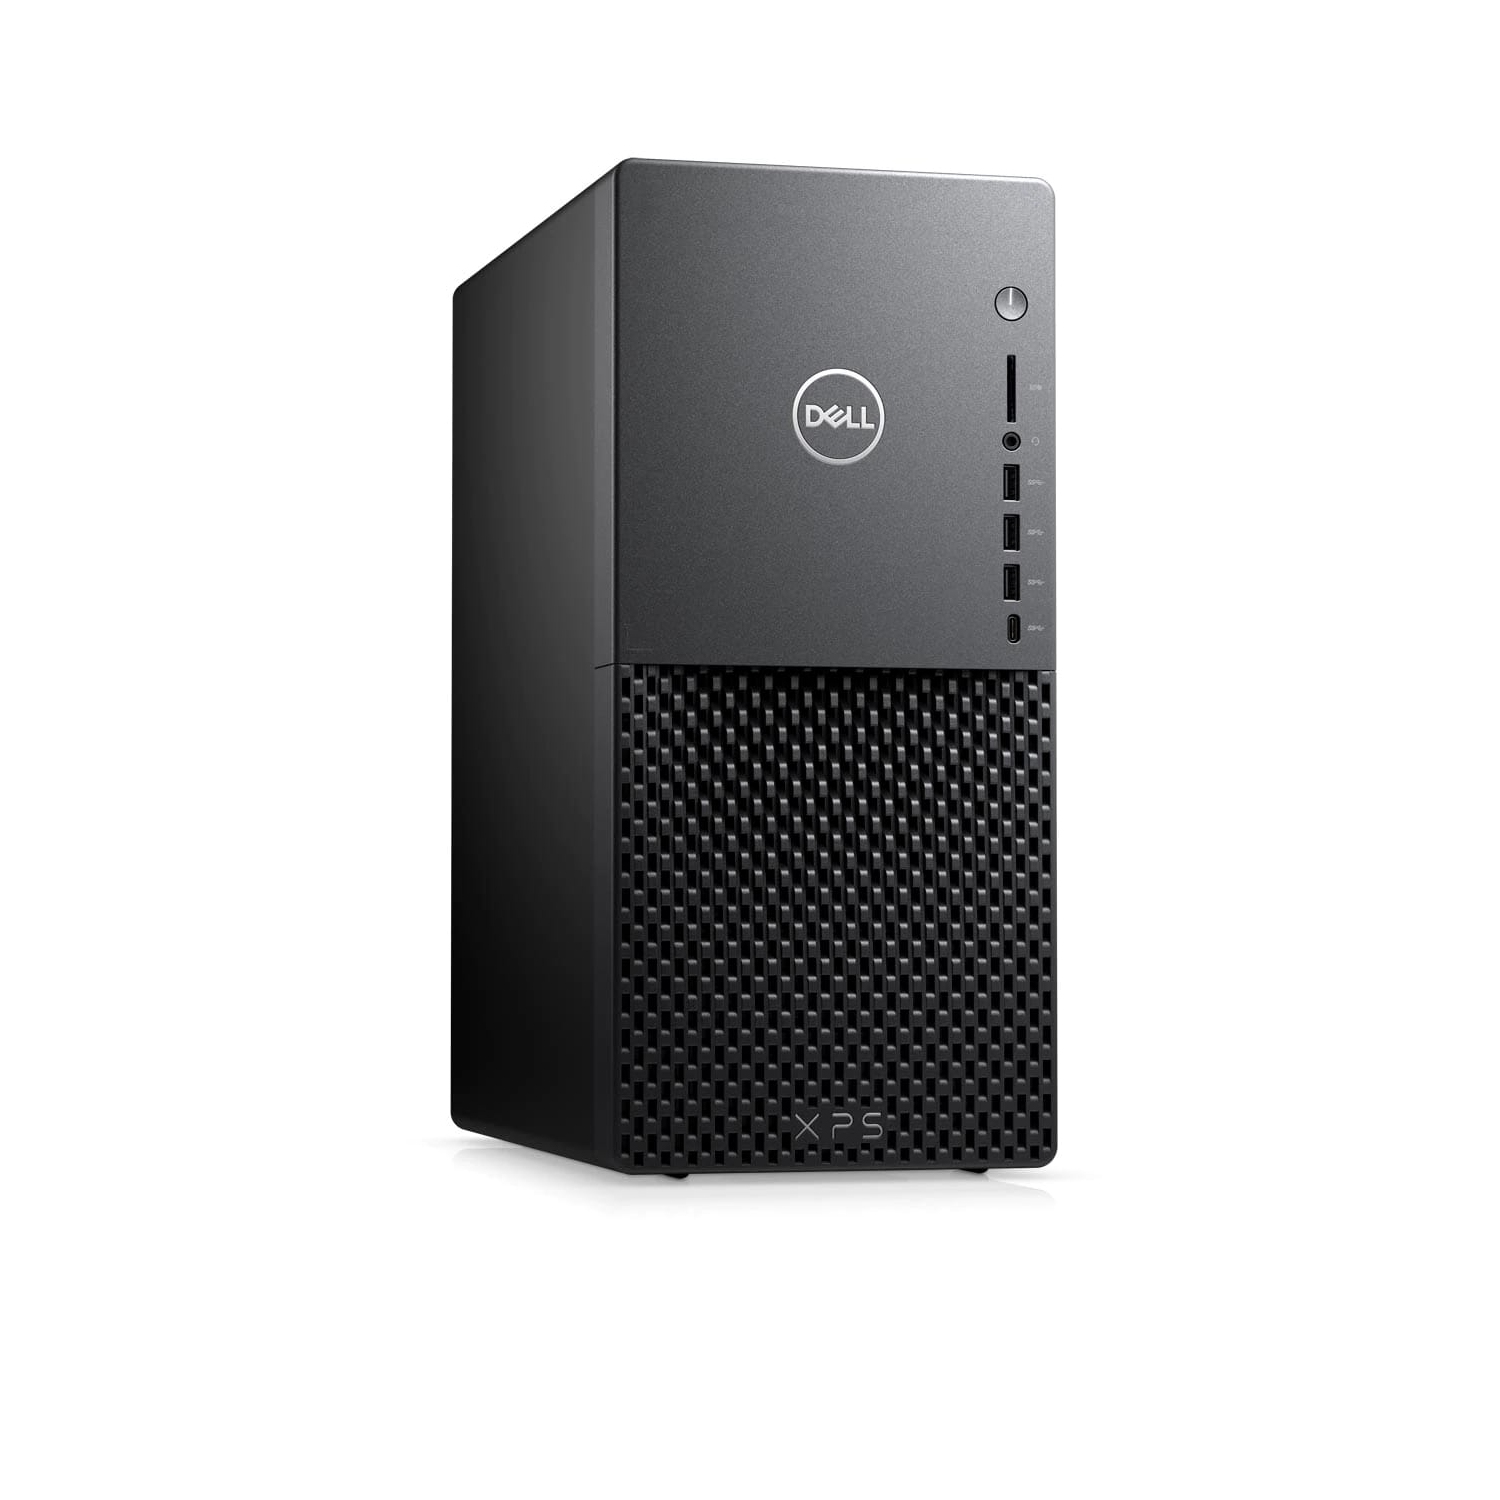 Refurbished (Excellent) - Dell XPS 8940 Desktop (2020) | Core i9 - 2TB SSD + 2TB HDD - 64GB RAM - RTX 3070 | 8 Cores @ 5.3 GHz - 11th Gen CPU Certified Refurbished